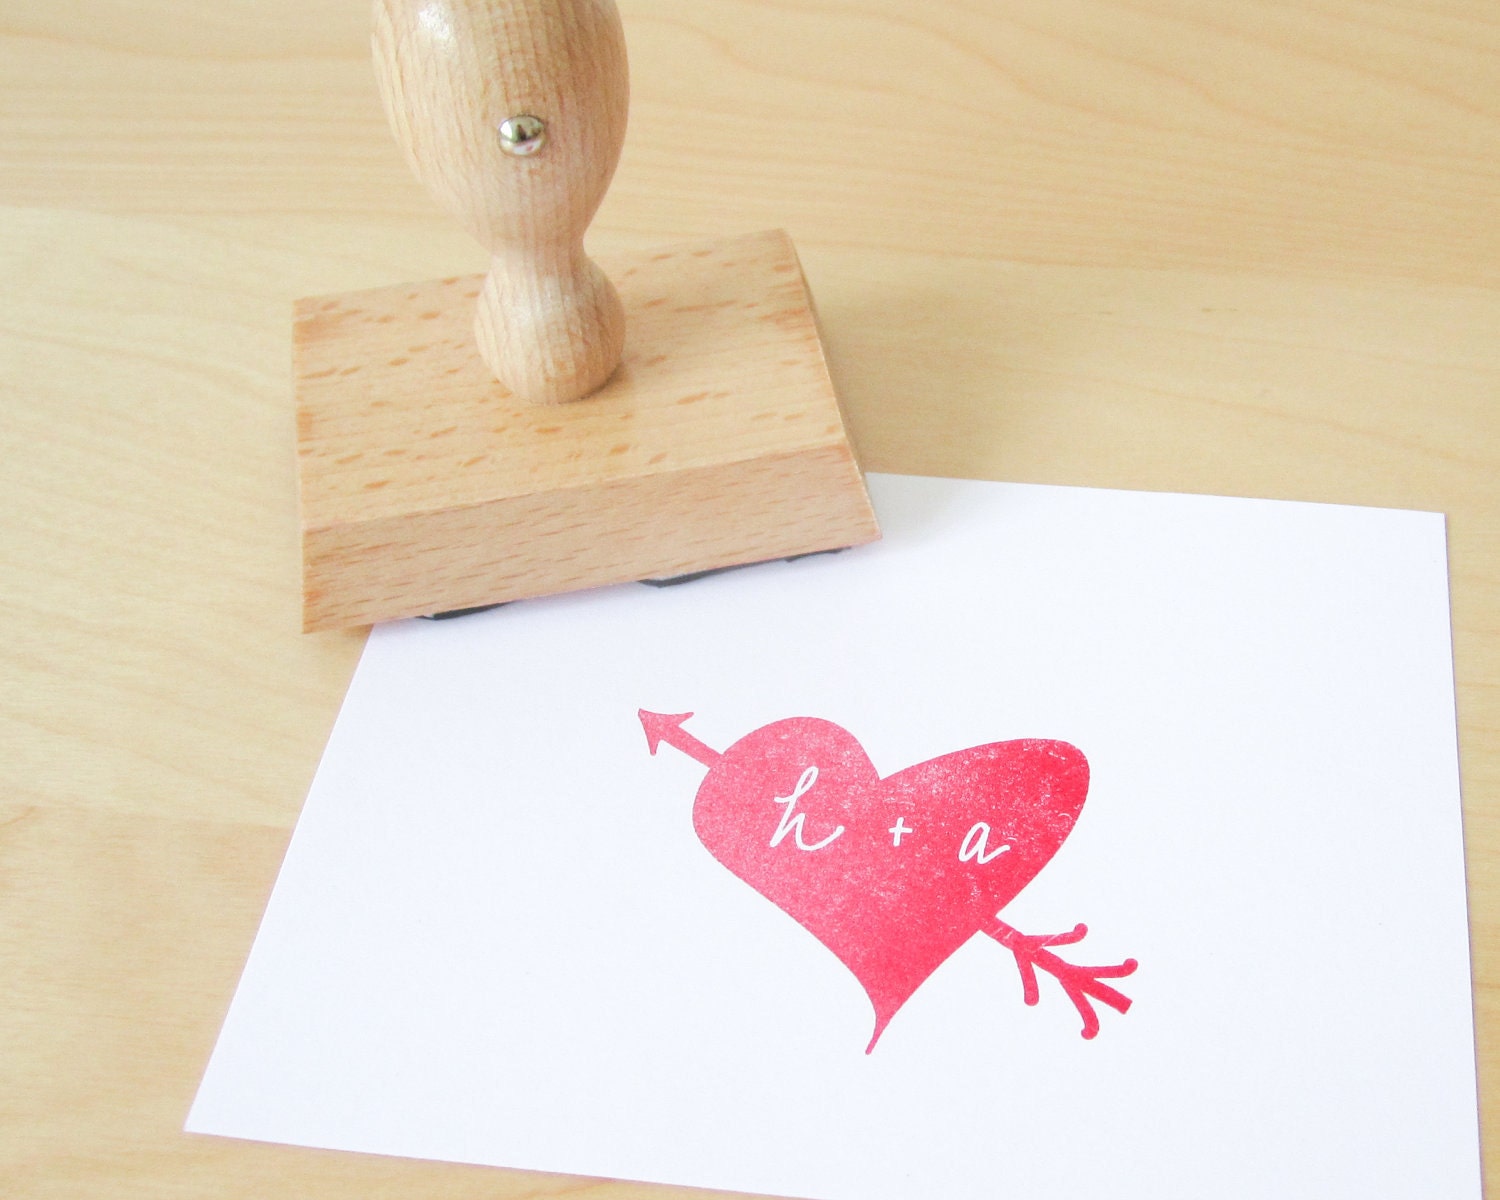 Personalized Wedding Stamp - custom stamp featuring a handdrawn heart and arrow with handwritten initials